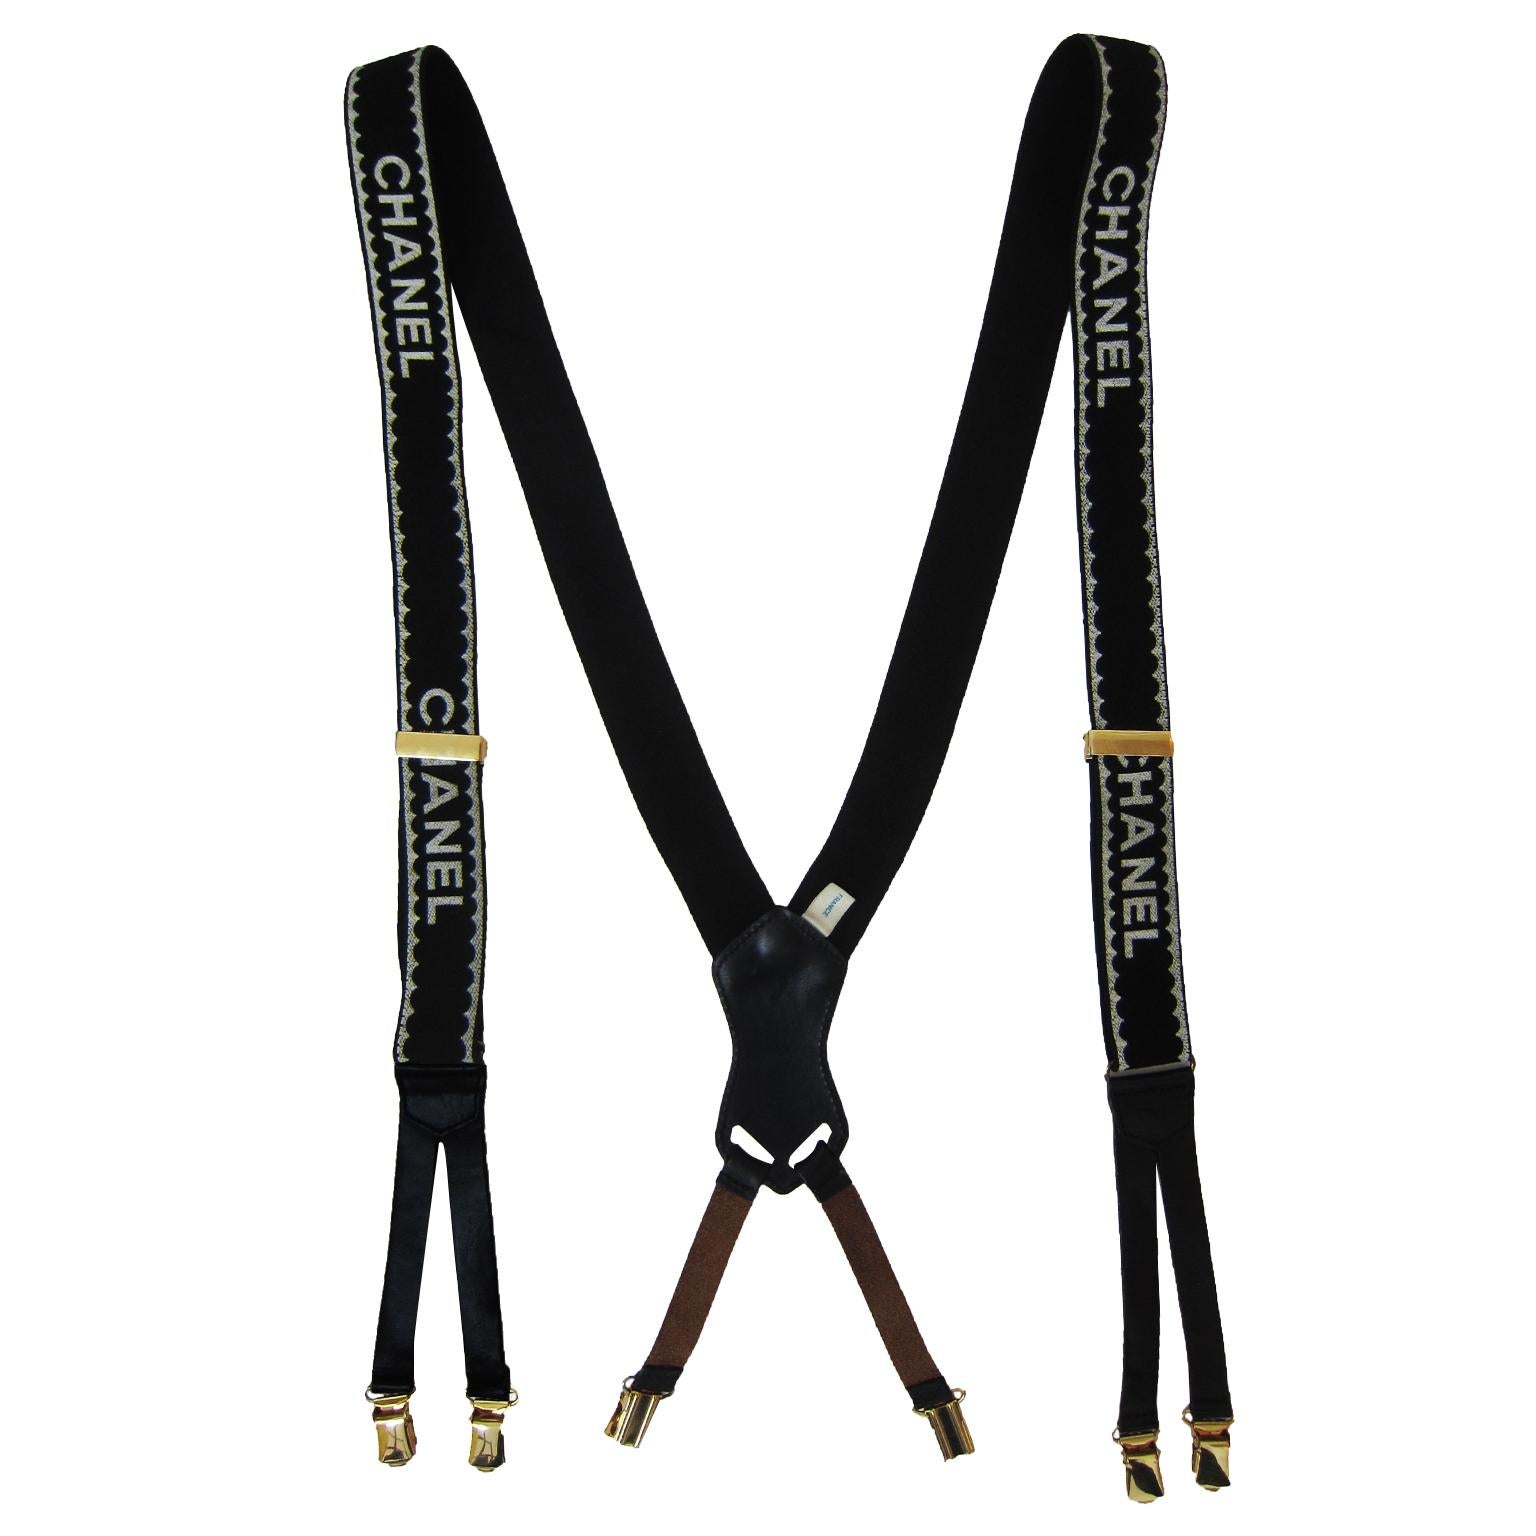 Iconic Chanel suspenders from ss 1994. With gold tone hard wear, black stretch elastic with leather, white Chanel logos. The straps are long and adjustable.
Made in France tag, in original box.